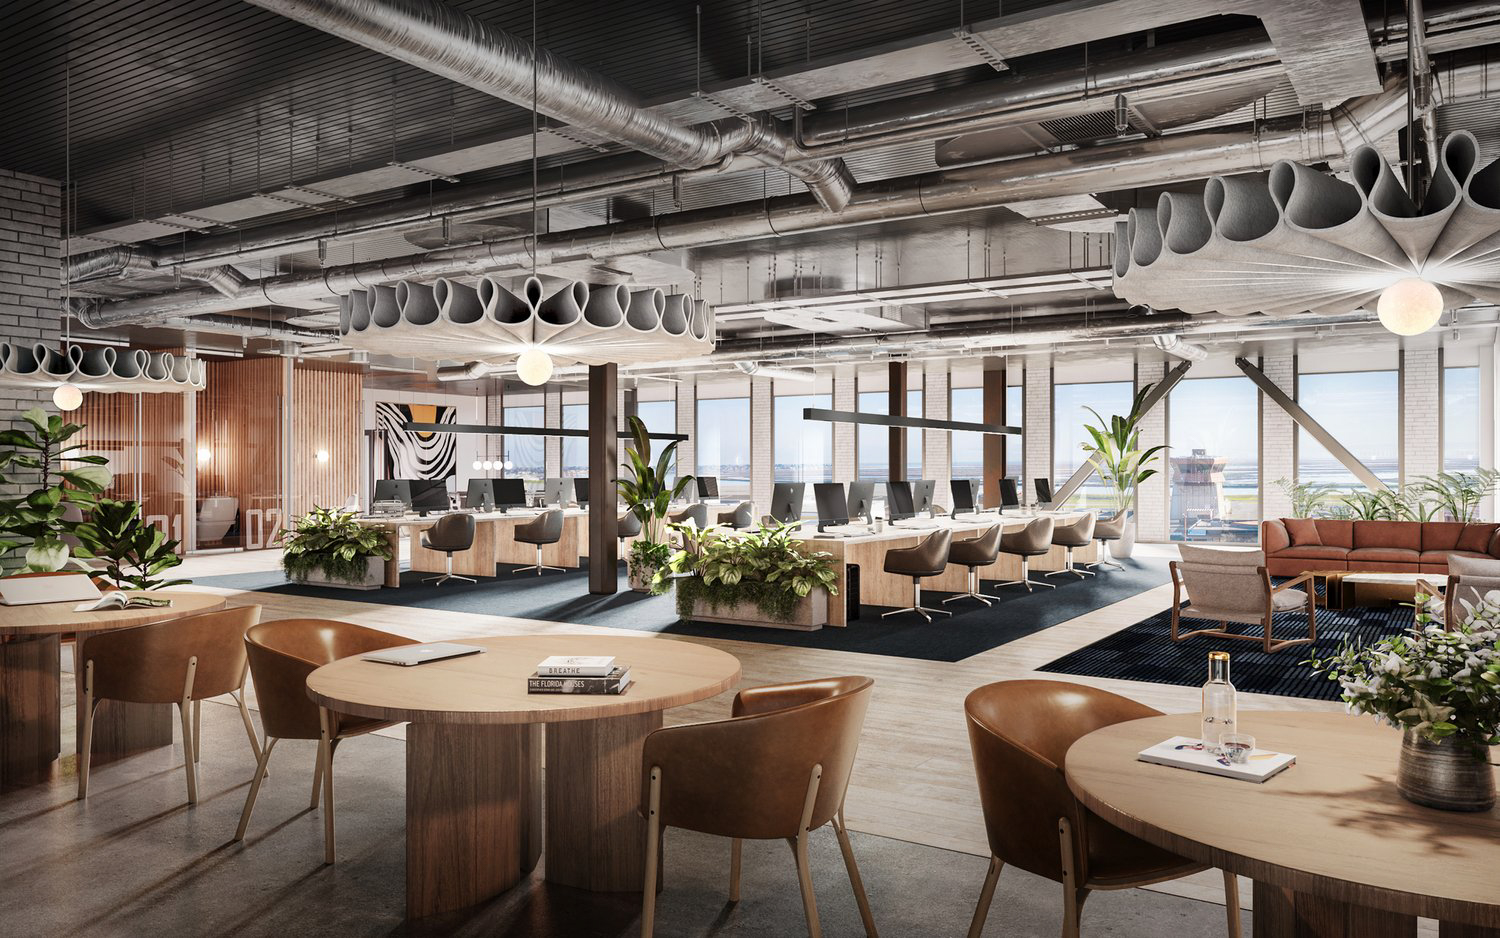 777 Industrial Road interior offices, rendering by Stanton Architecture